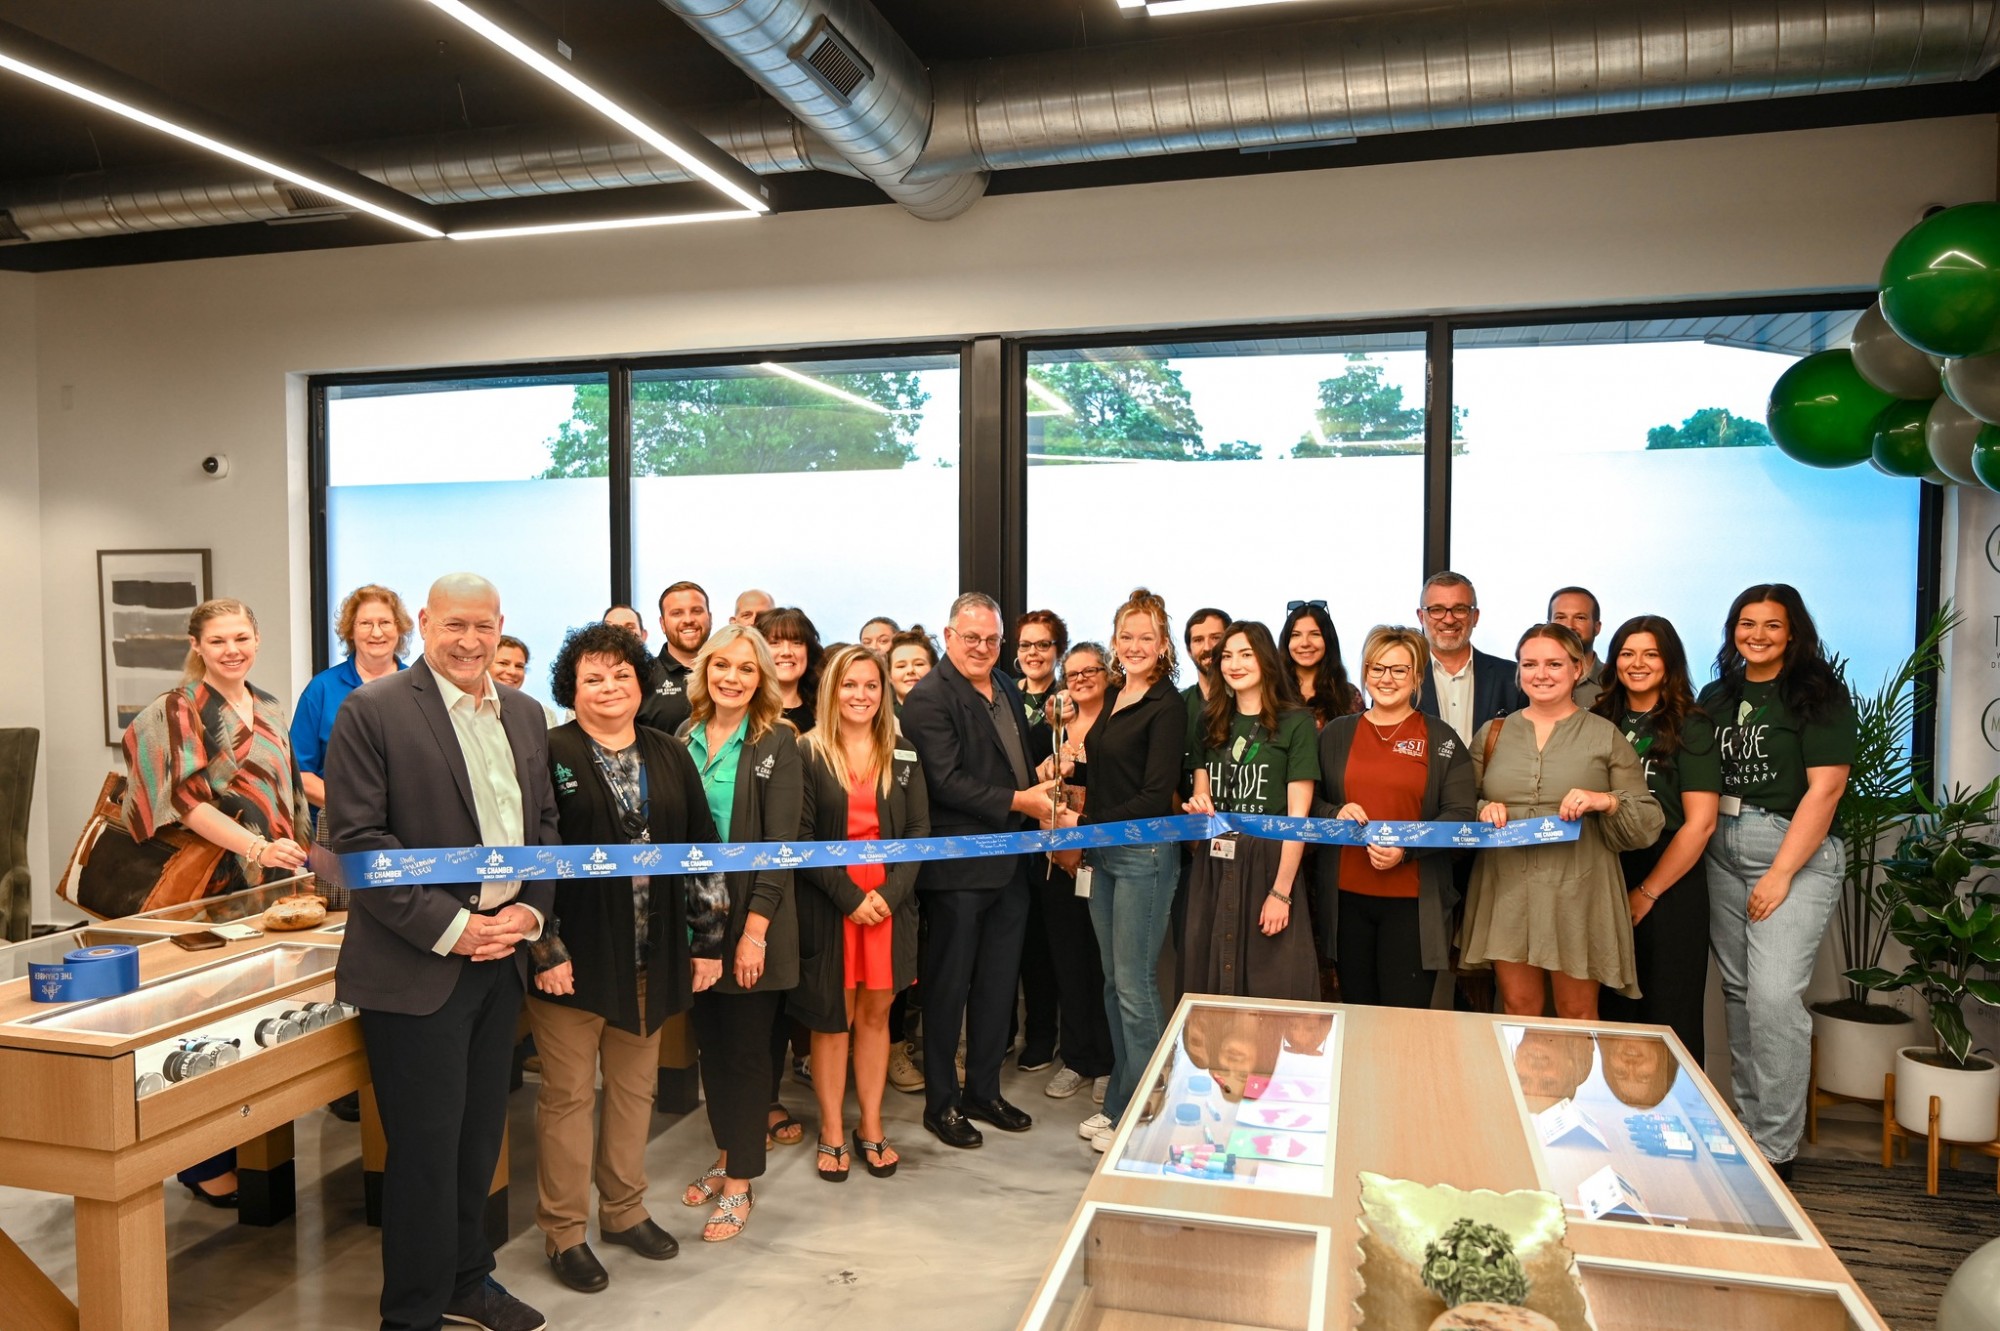 Thrive Wellness Dispensary Celebrates with a Ribbon Cutting in advance of their Grand Opening